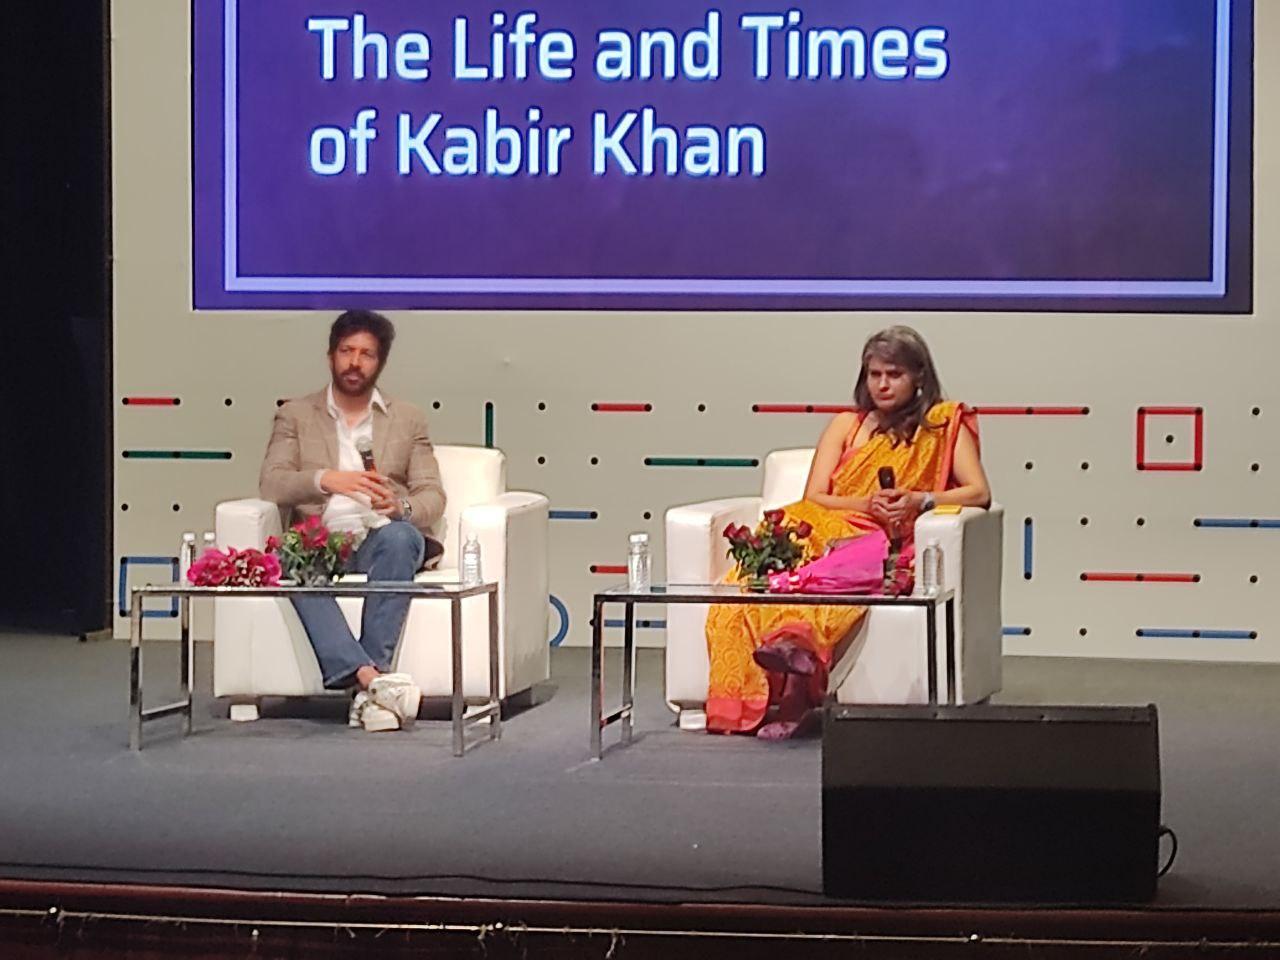 Making films or flopping is a part of life - Kabir Khan